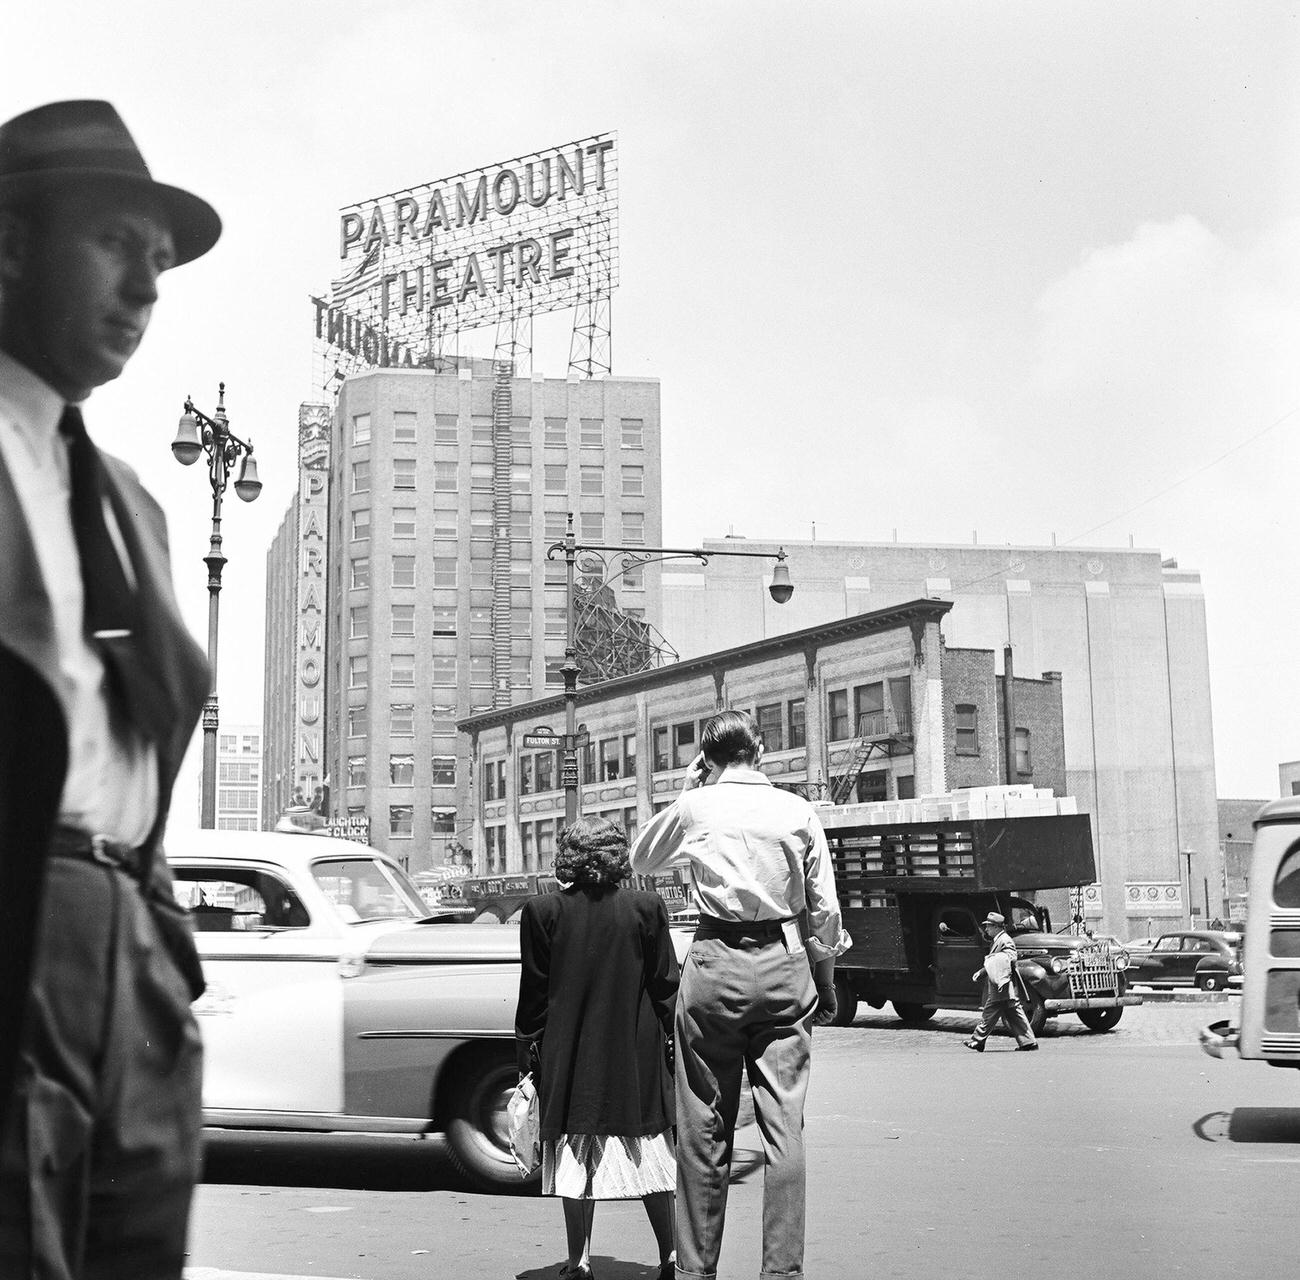 Intersection Of Fulton Street And Flatbush Avenue, Towards The Paramount Theatre